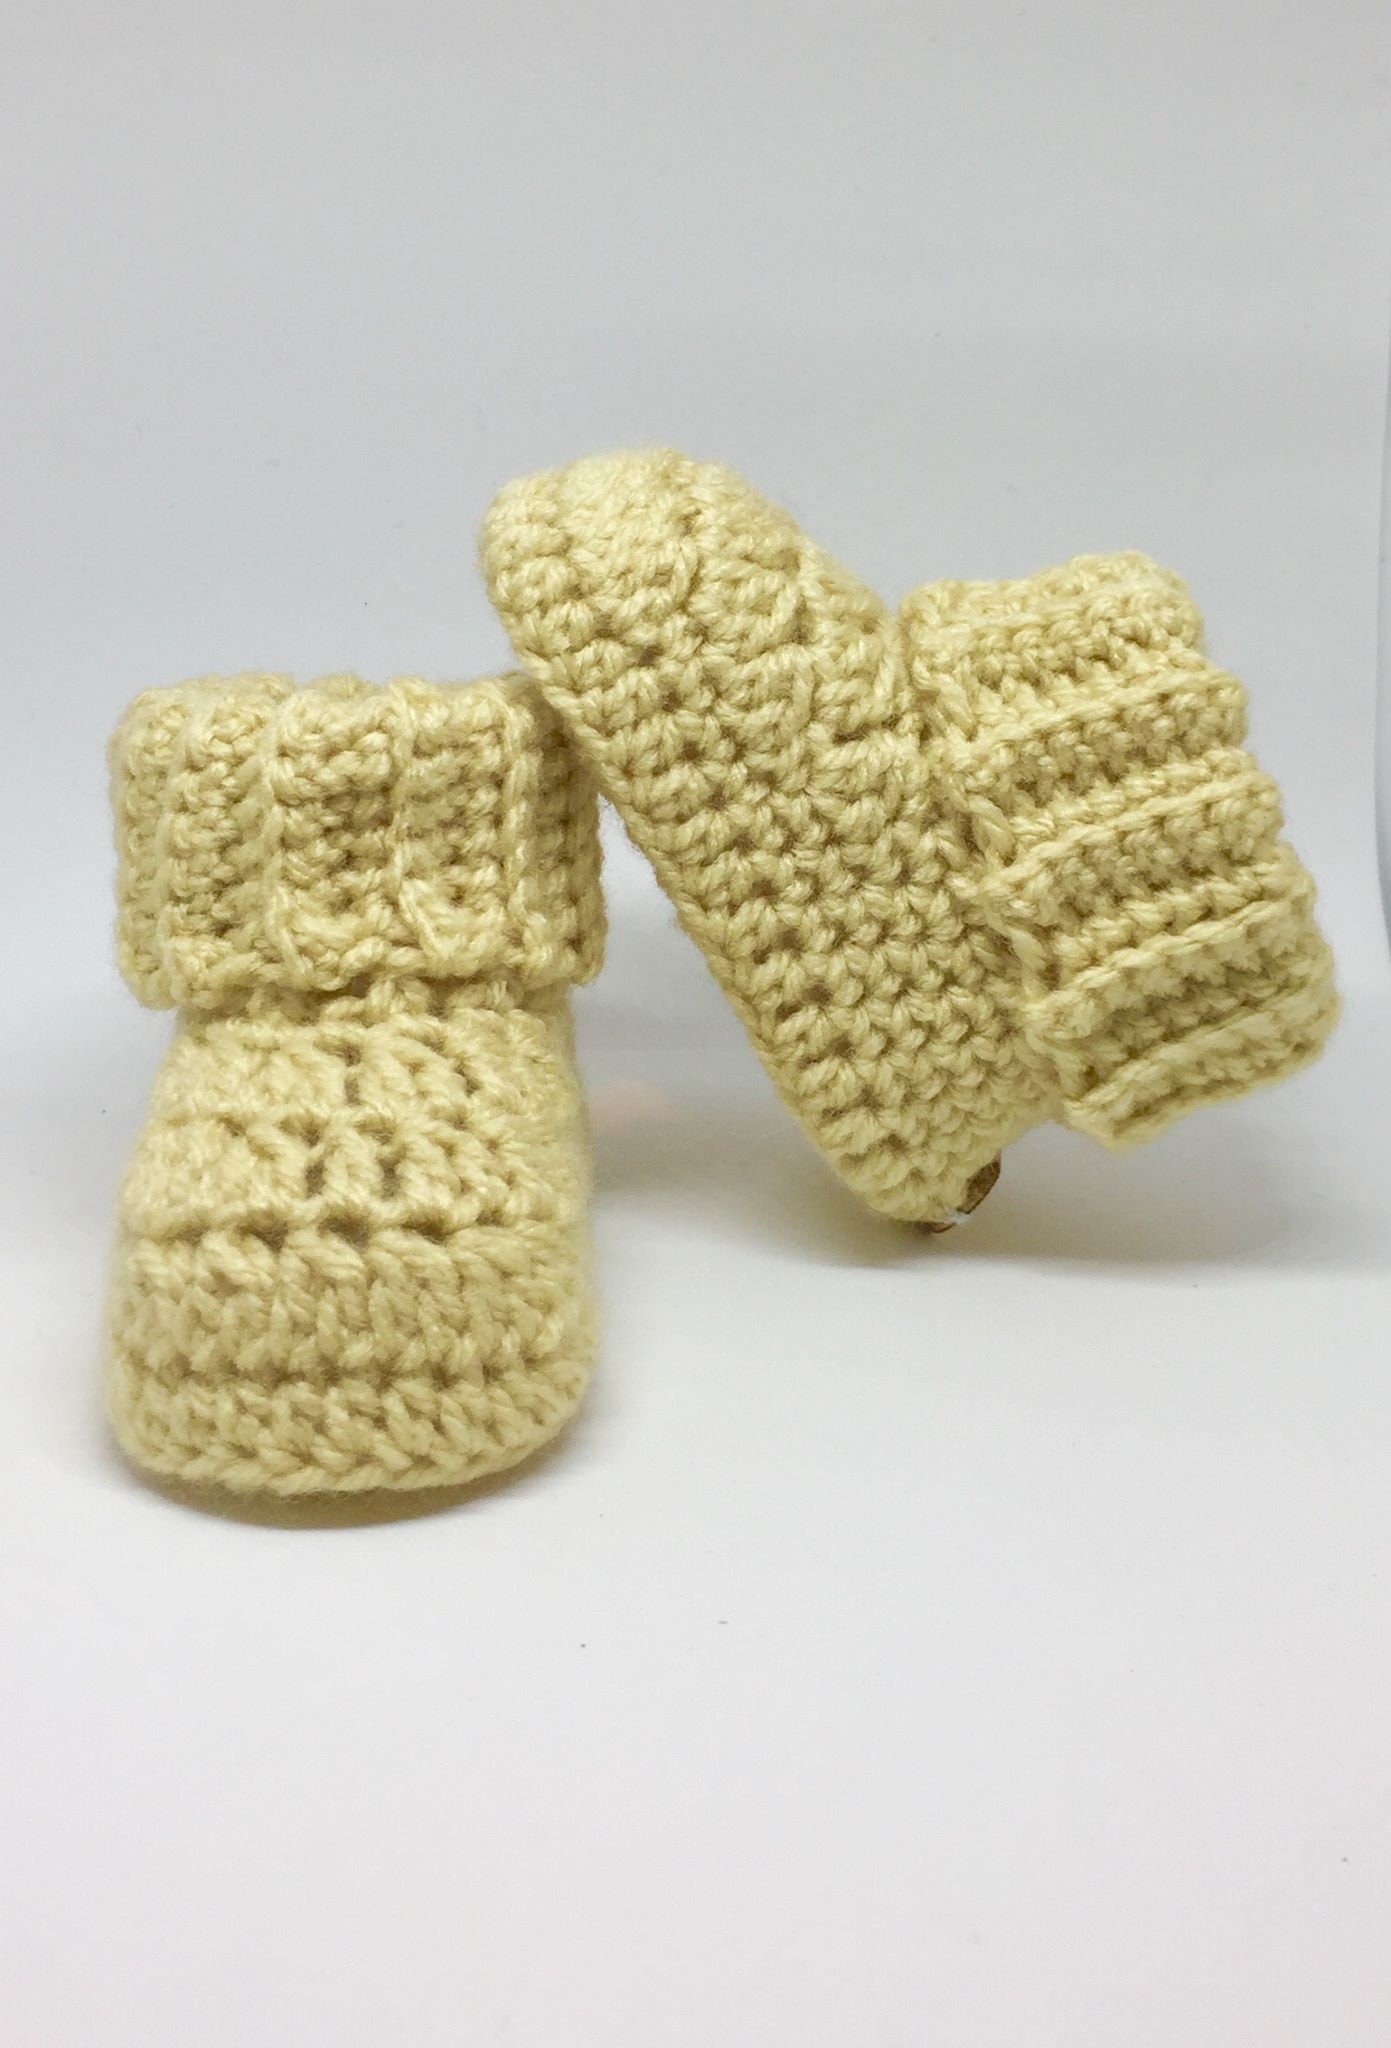 0-3 gift announcement 6-9 months baby boots knitted Crochet baby booties baby shower unisex baby booties unisex baby shoes 3-6